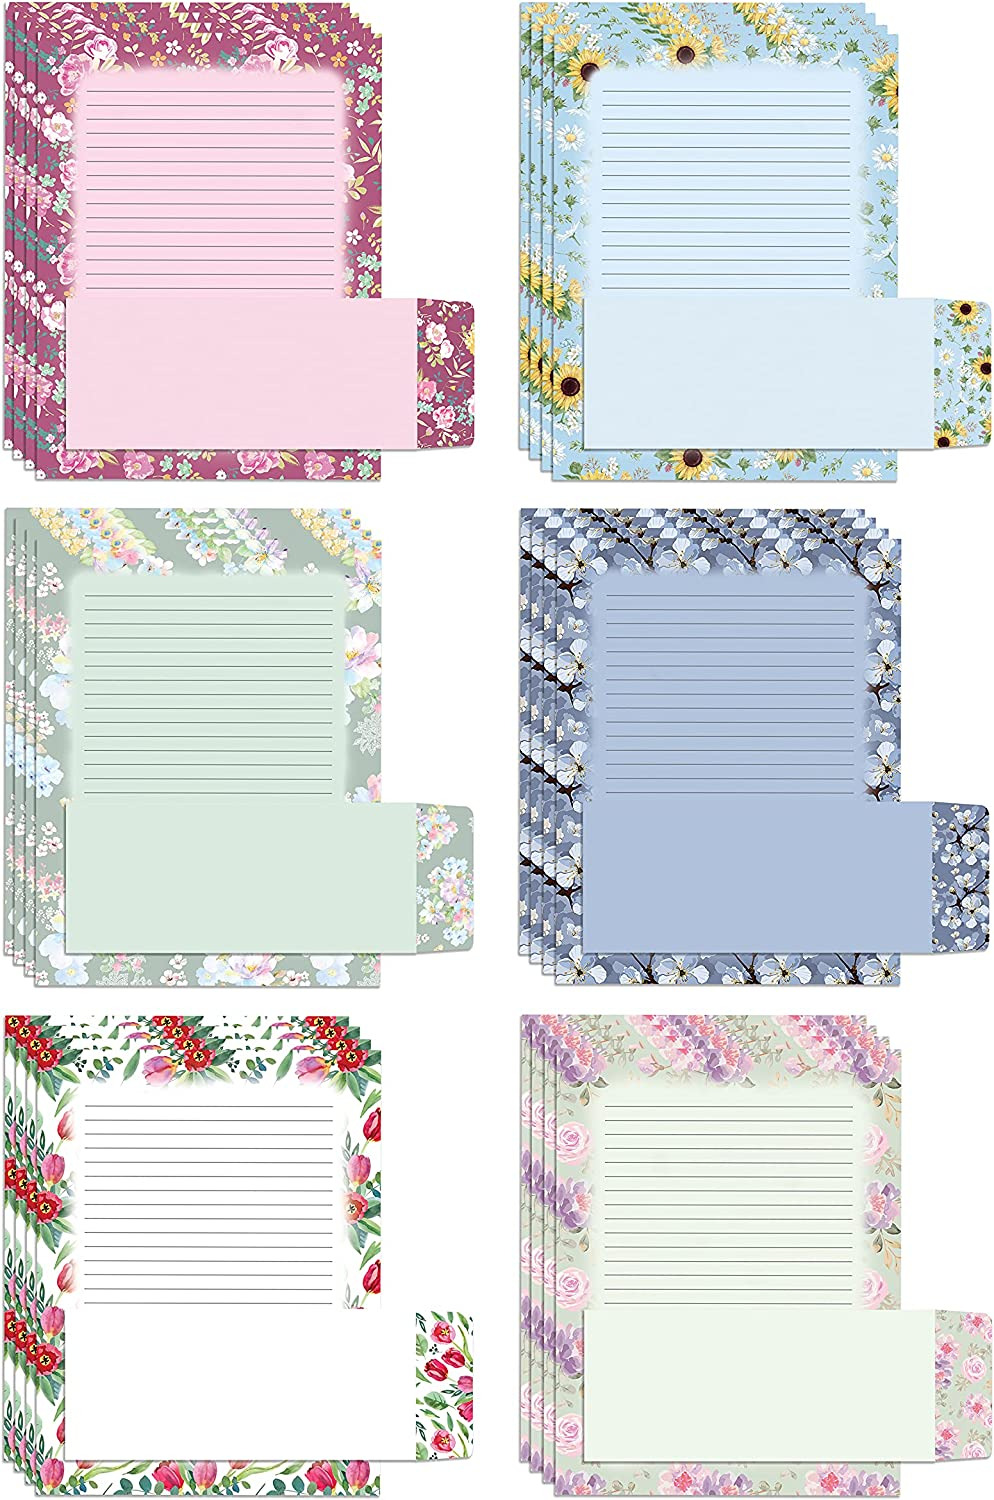 Better Office Products Floral Paper Stationery Set, 100 Piece Set (50 Lined Shee